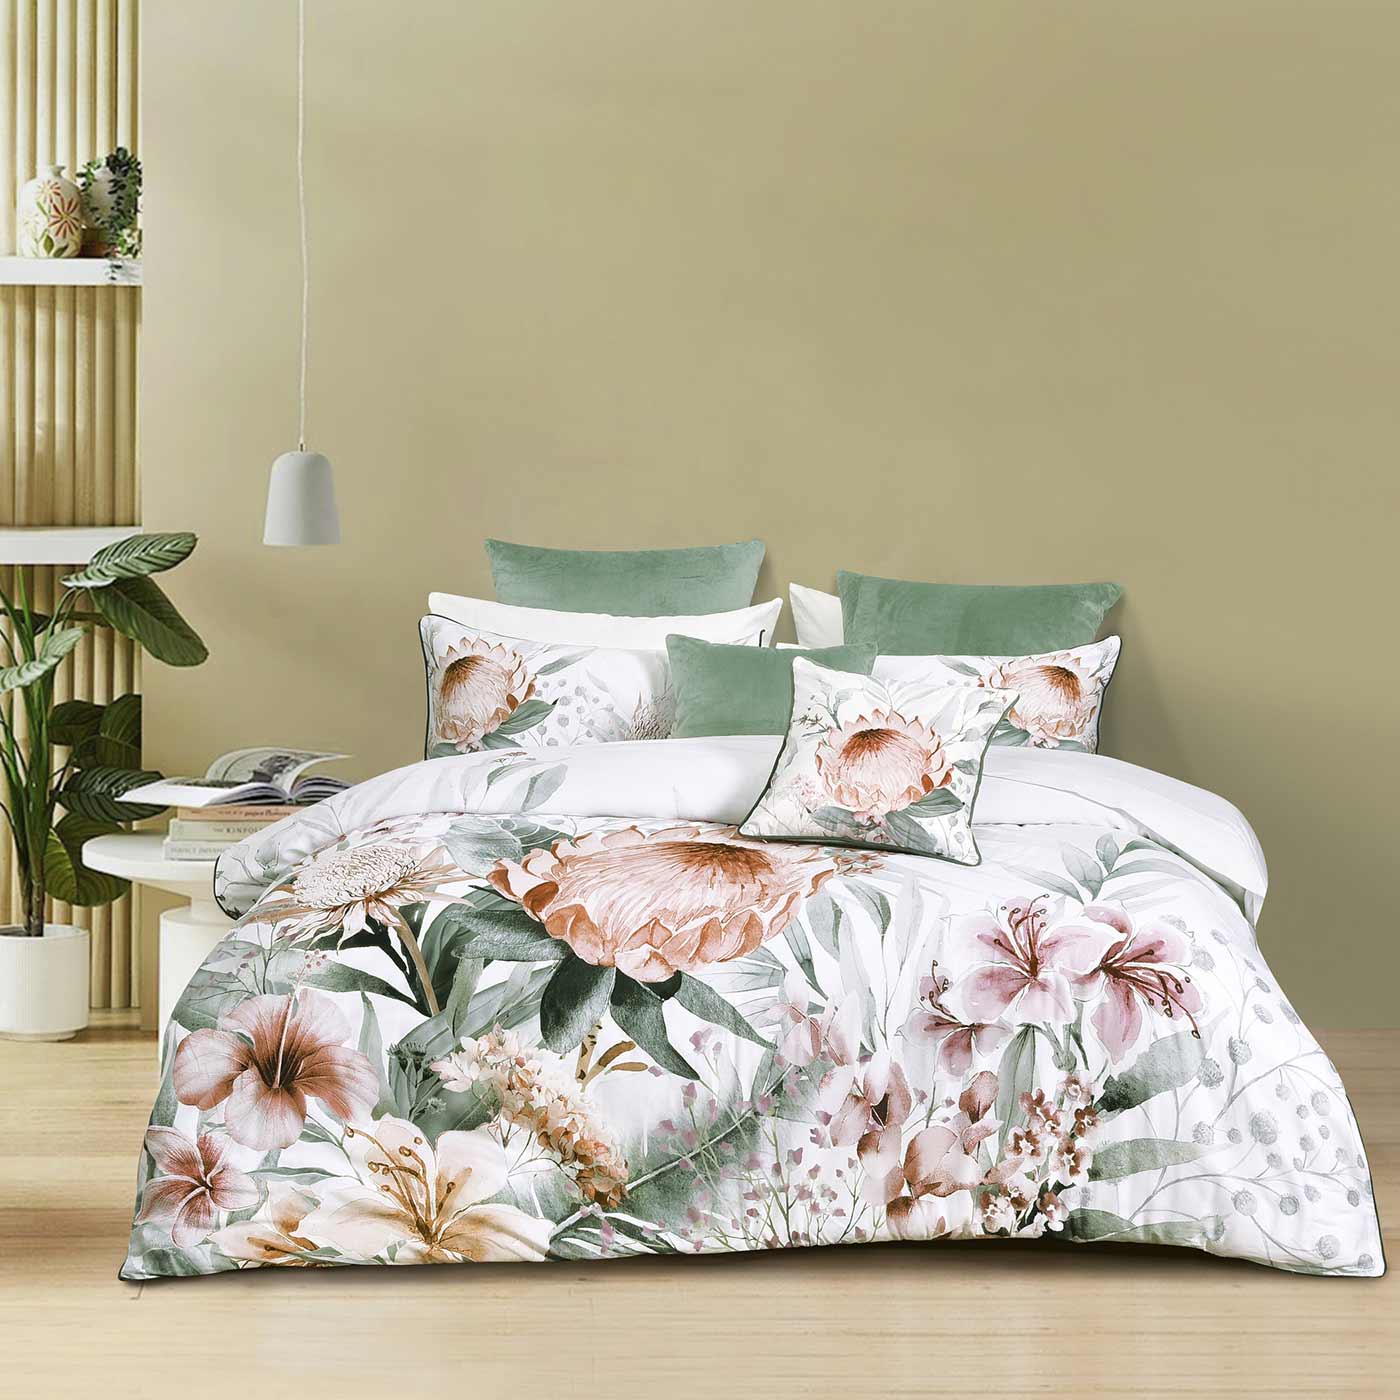 A botanical design featuring a breathtaking large protea in the centre of the bed. On trend eucalyptus tones married with natural terracotta tones create a calm and relaxed environment. 